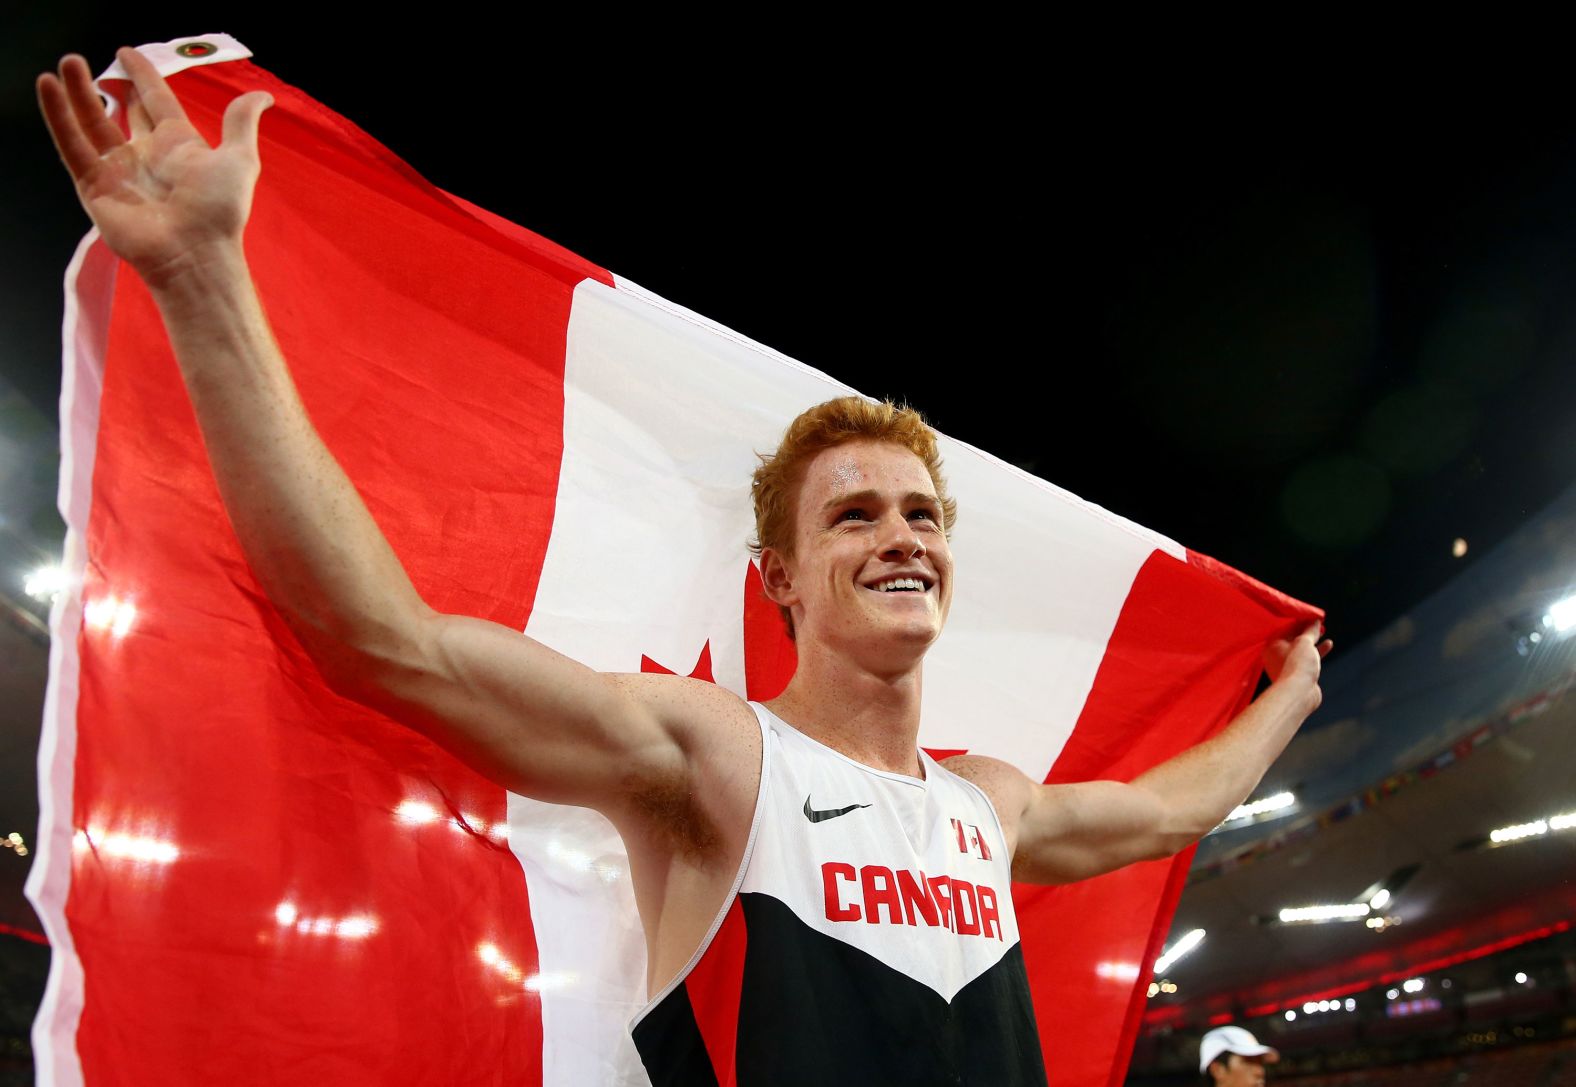 Canadian world champion pole vaulter <a href="index.php?page=&url=https%3A%2F%2Fwww.cnn.com%2F2024%2F01%2F18%2Fsport%2Fshawn-barber-death-pole-vault%2Findex.html" target="_blank">Shawn Barber</a> died January 17 at the age of 29, his agent Paul Doyle told CNN. Barber passed away from medical complications, according to a statement from the University of Akron's athletics department. "Barber had fallen ill and had been experiencing poor health for some time," the statement said.